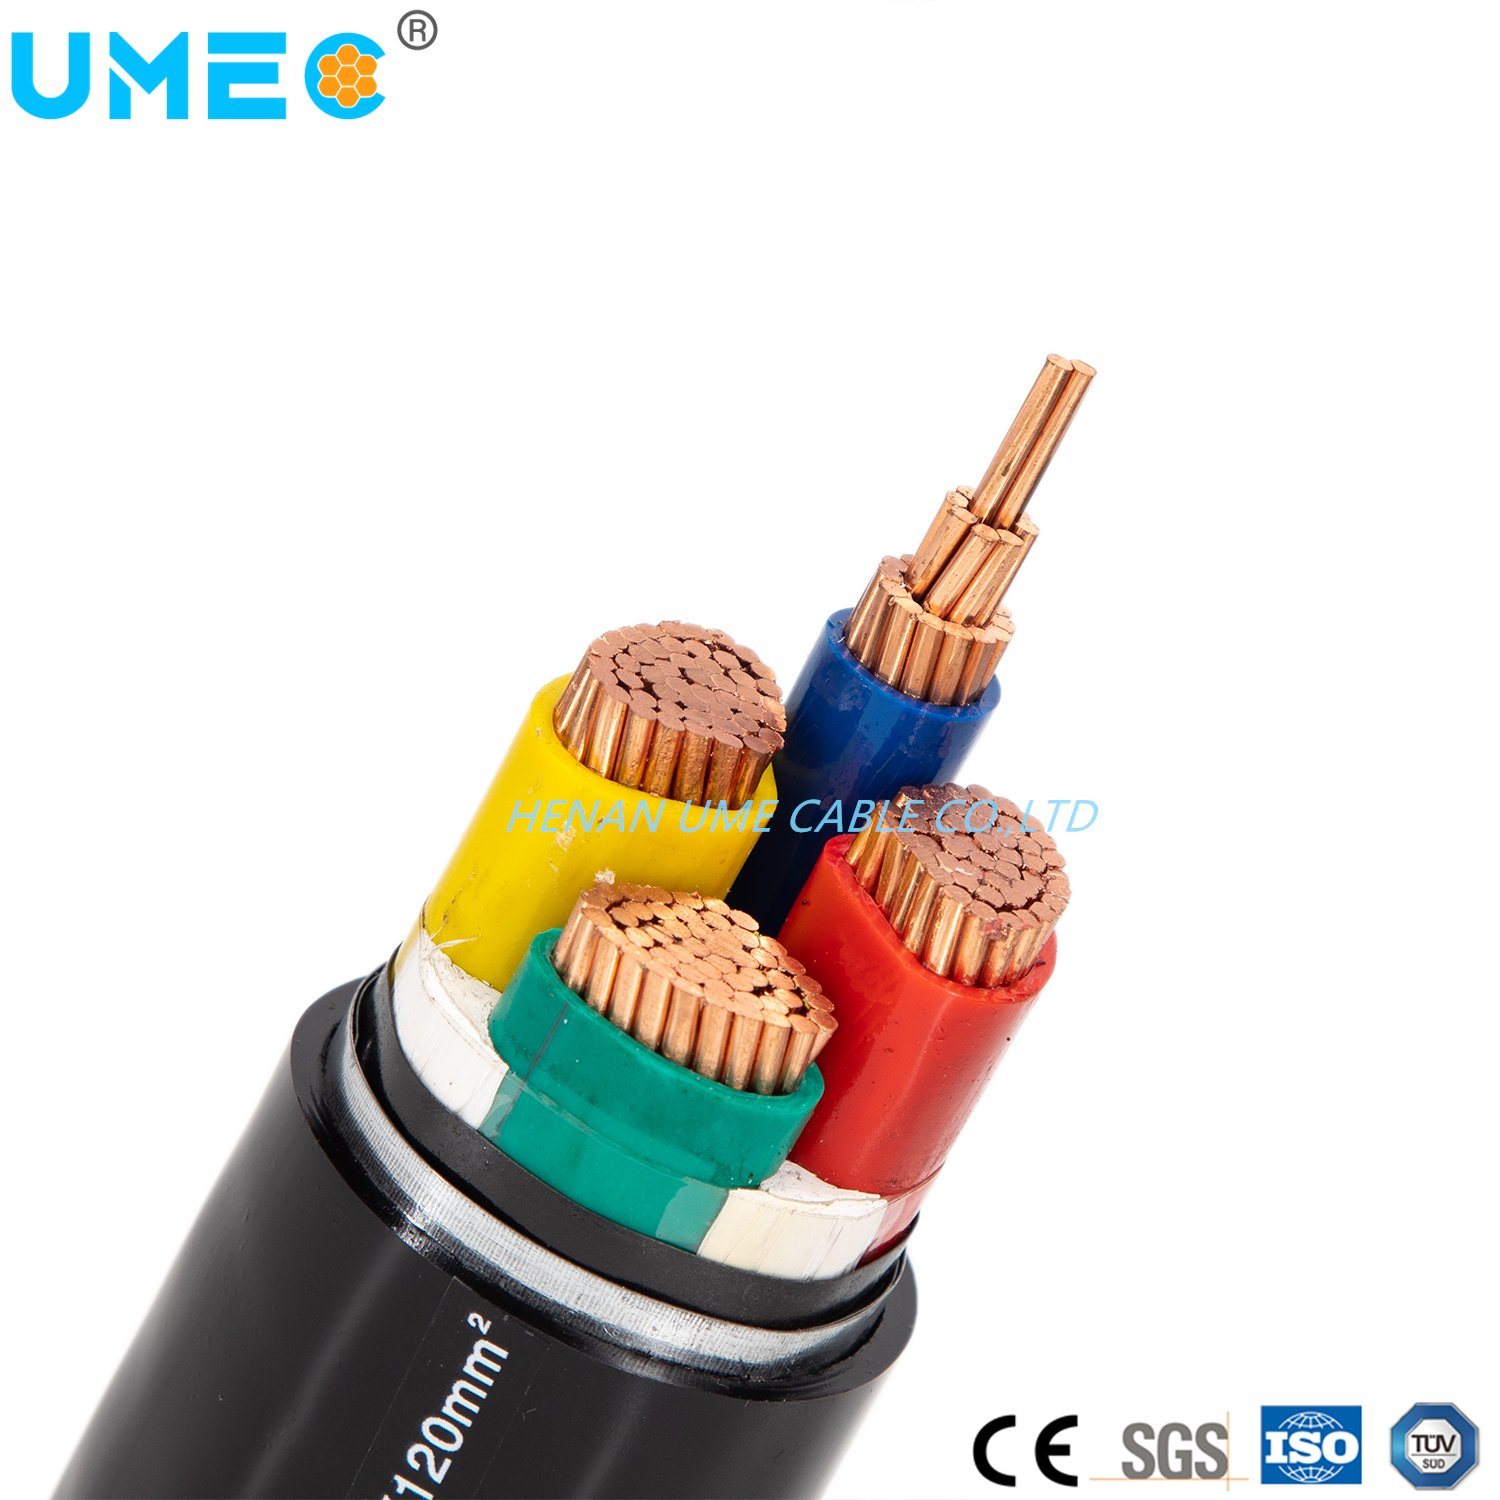 Underground Qualify 8.7/10kv Cu (Al) Conductor PVC Insulated PVC Sheathed Steel Tape Armoured Flame Retardant Cable Zr-VV22 Zr-Vlv22